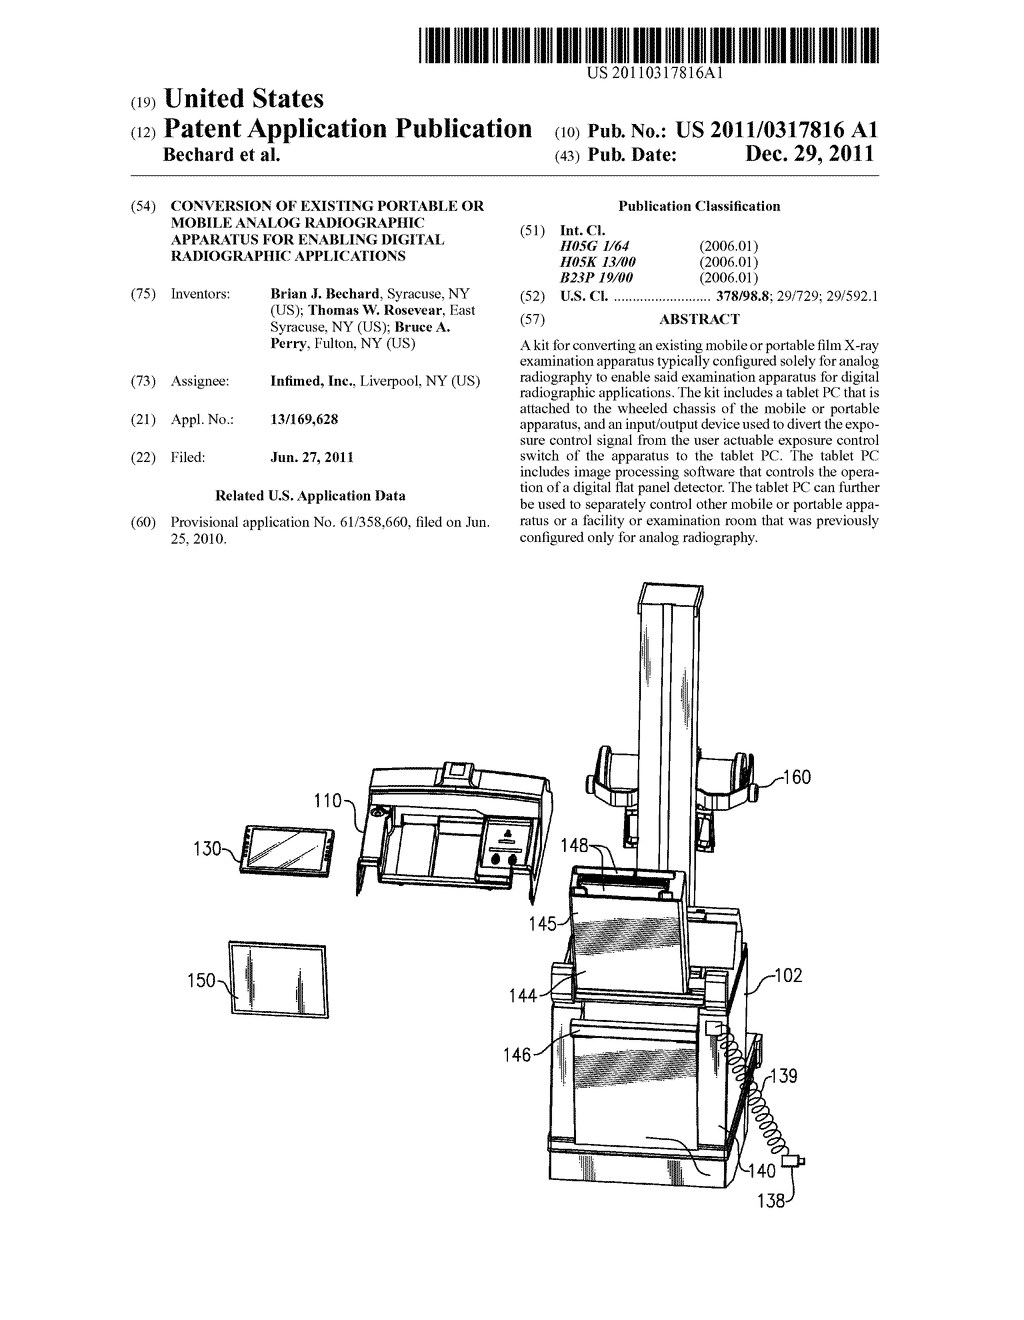 Conversion of Existing Portable or Mobile Analog Radiographic Apparatus     for Enabling Digital Radiographic Applications - diagram, schematic, and image 01